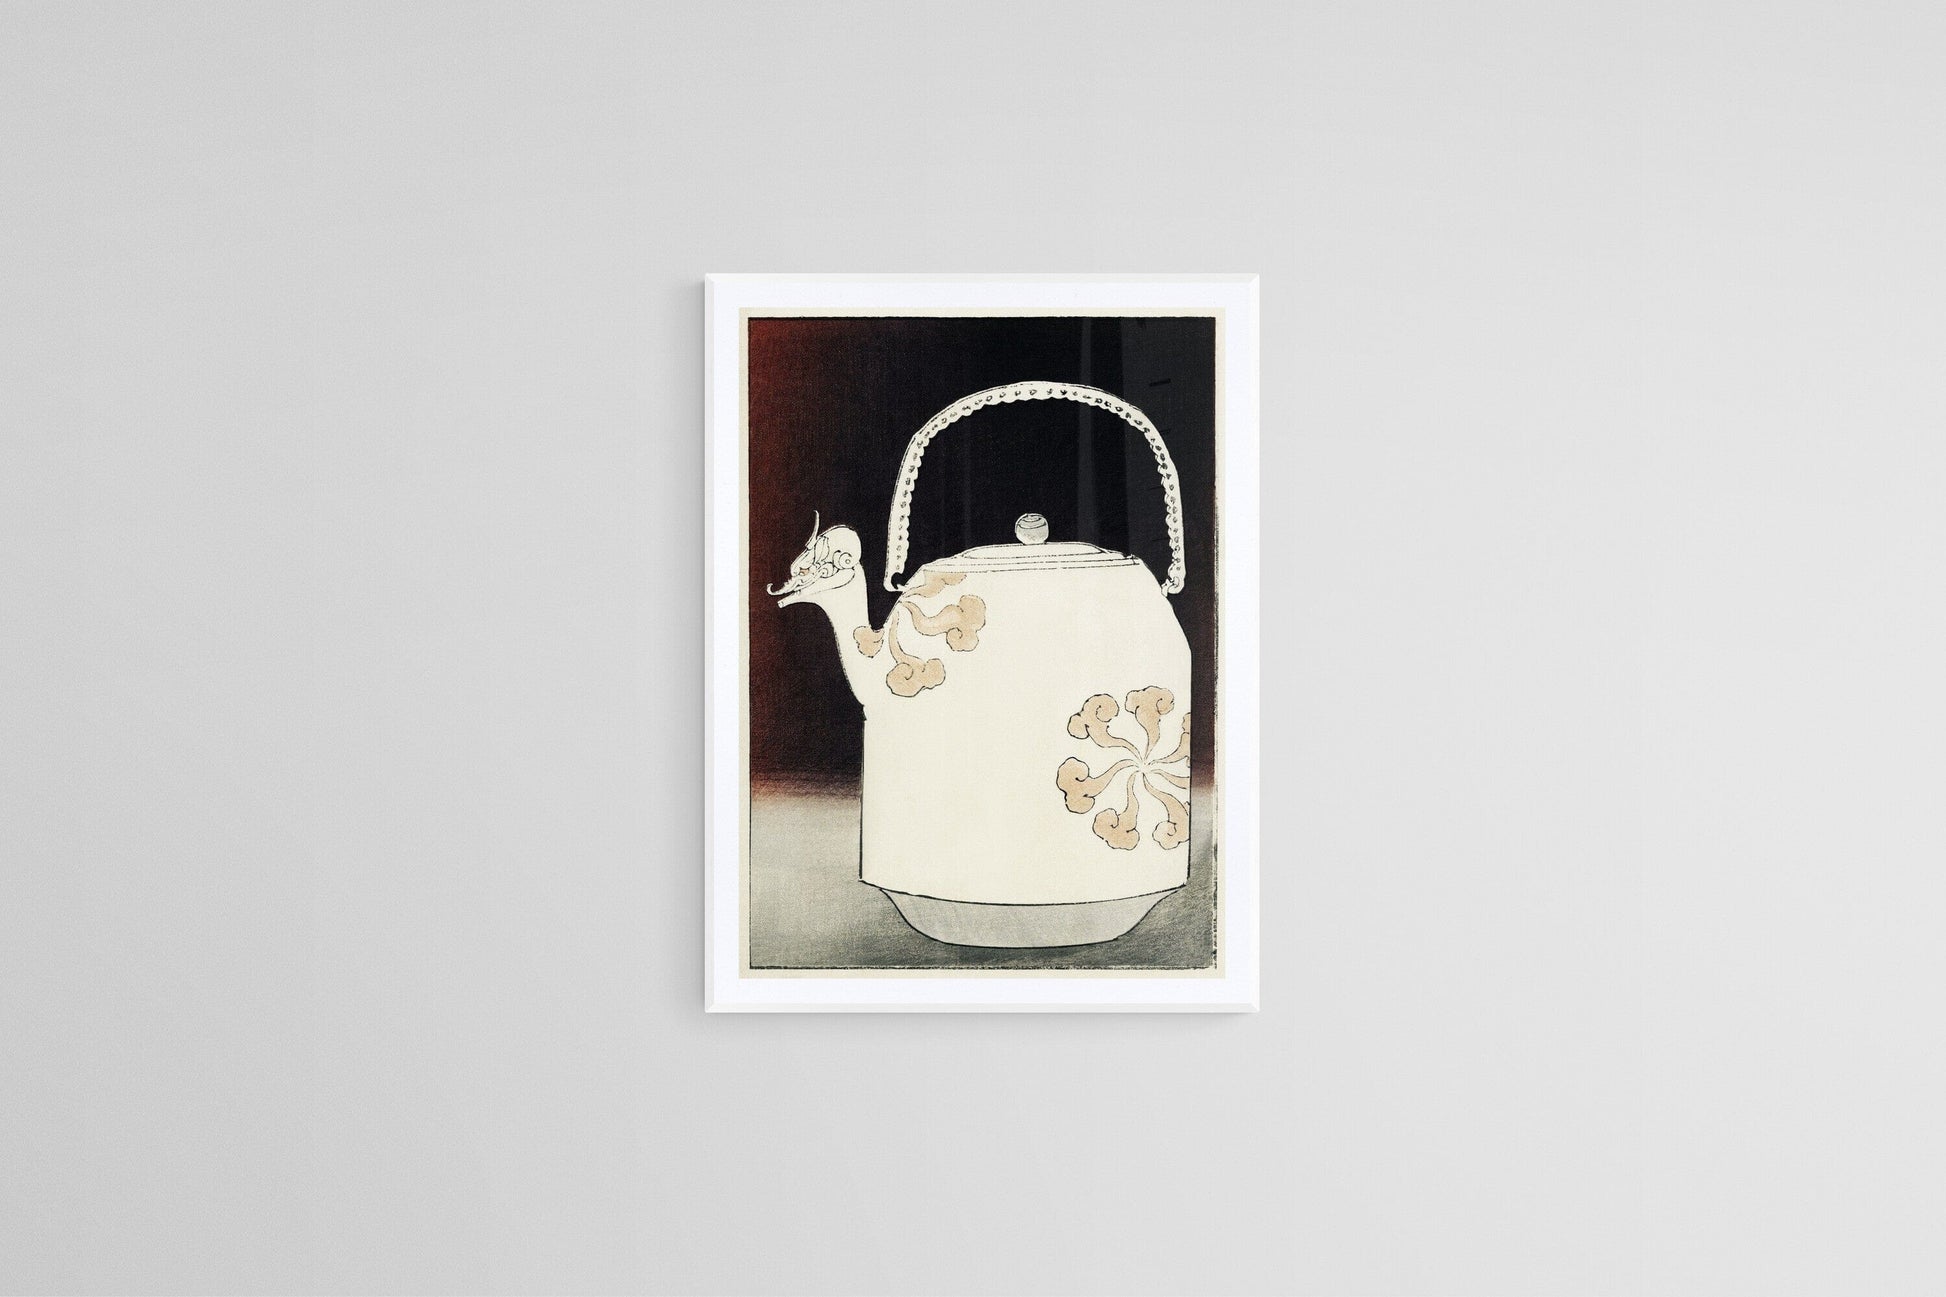 East Asian inspired kettle (1890s) | Traditional Japanese artwork Posters, Prints, & Visual Artwork The Trumpet Shop   